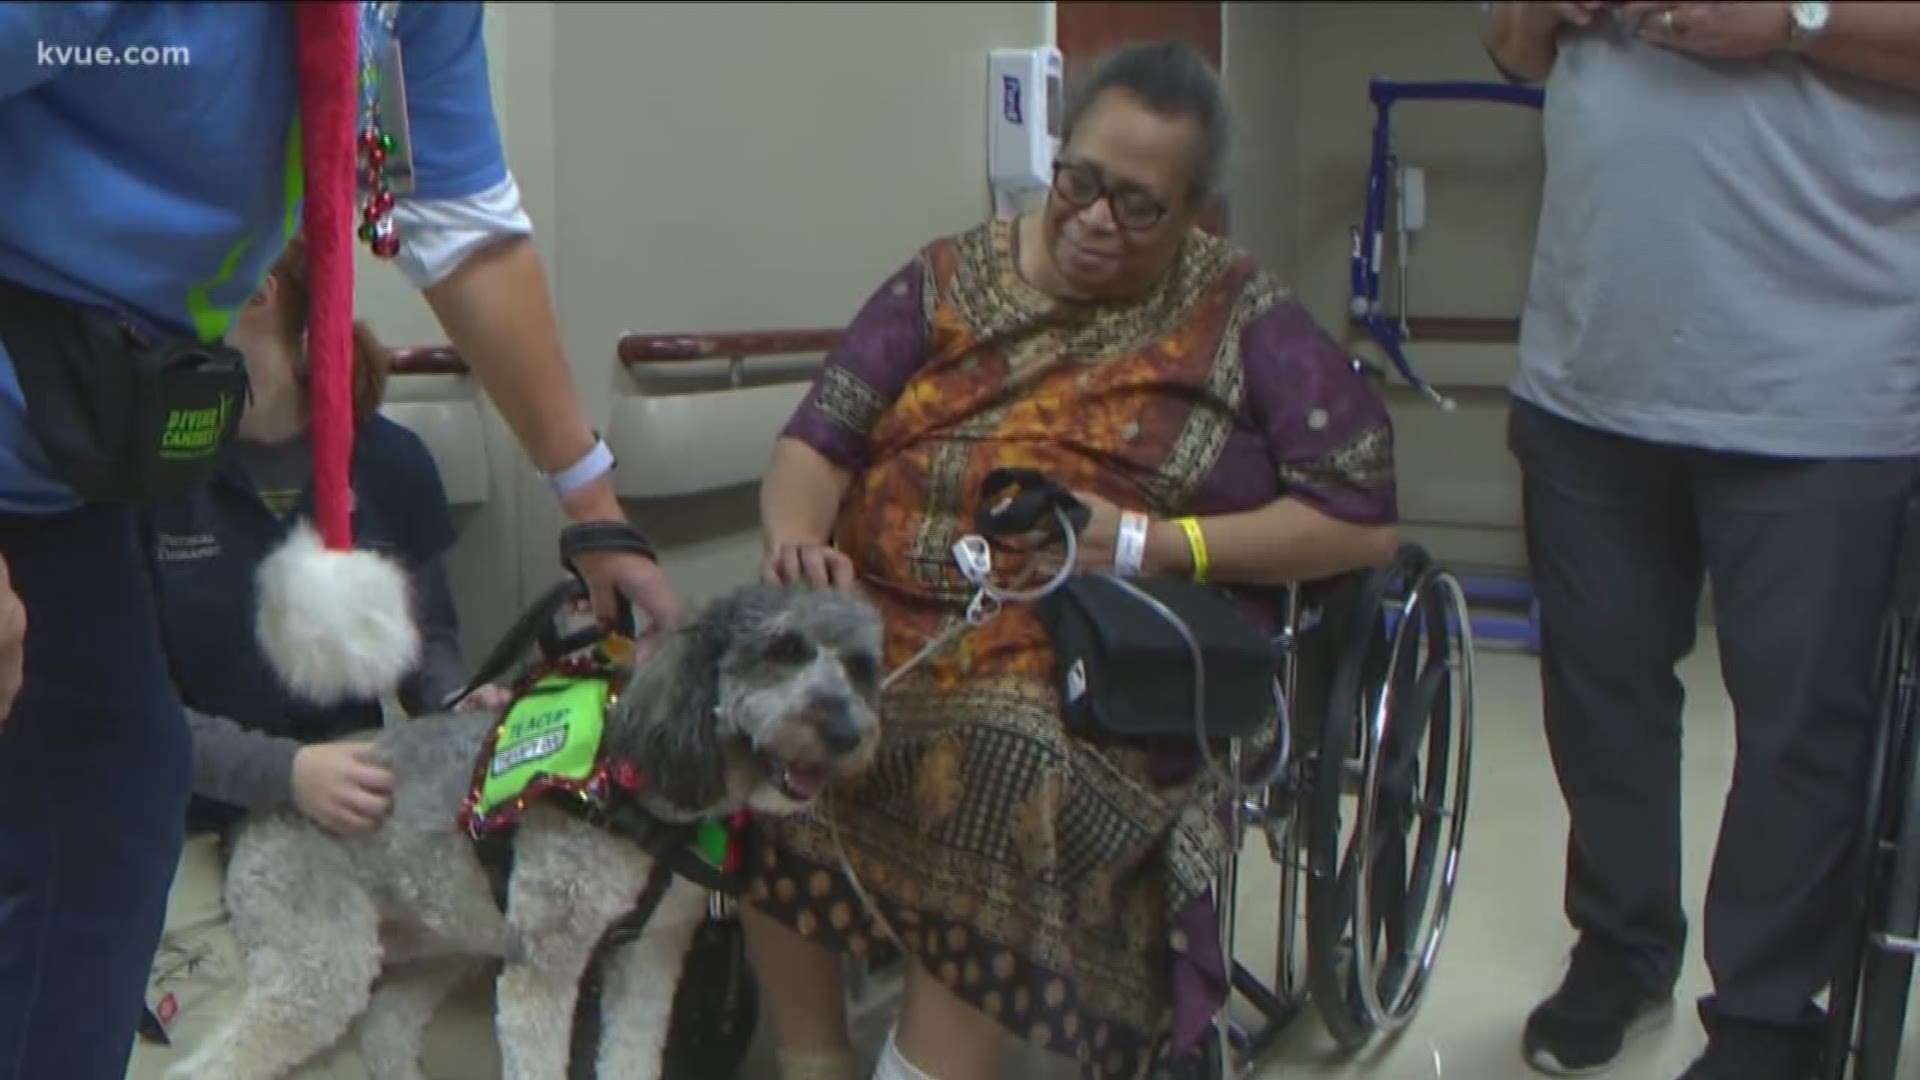 Therapy dogs dressed in Christmas gear paraded around the halls of the St. David's Rehabilitation Hospital in Austin.